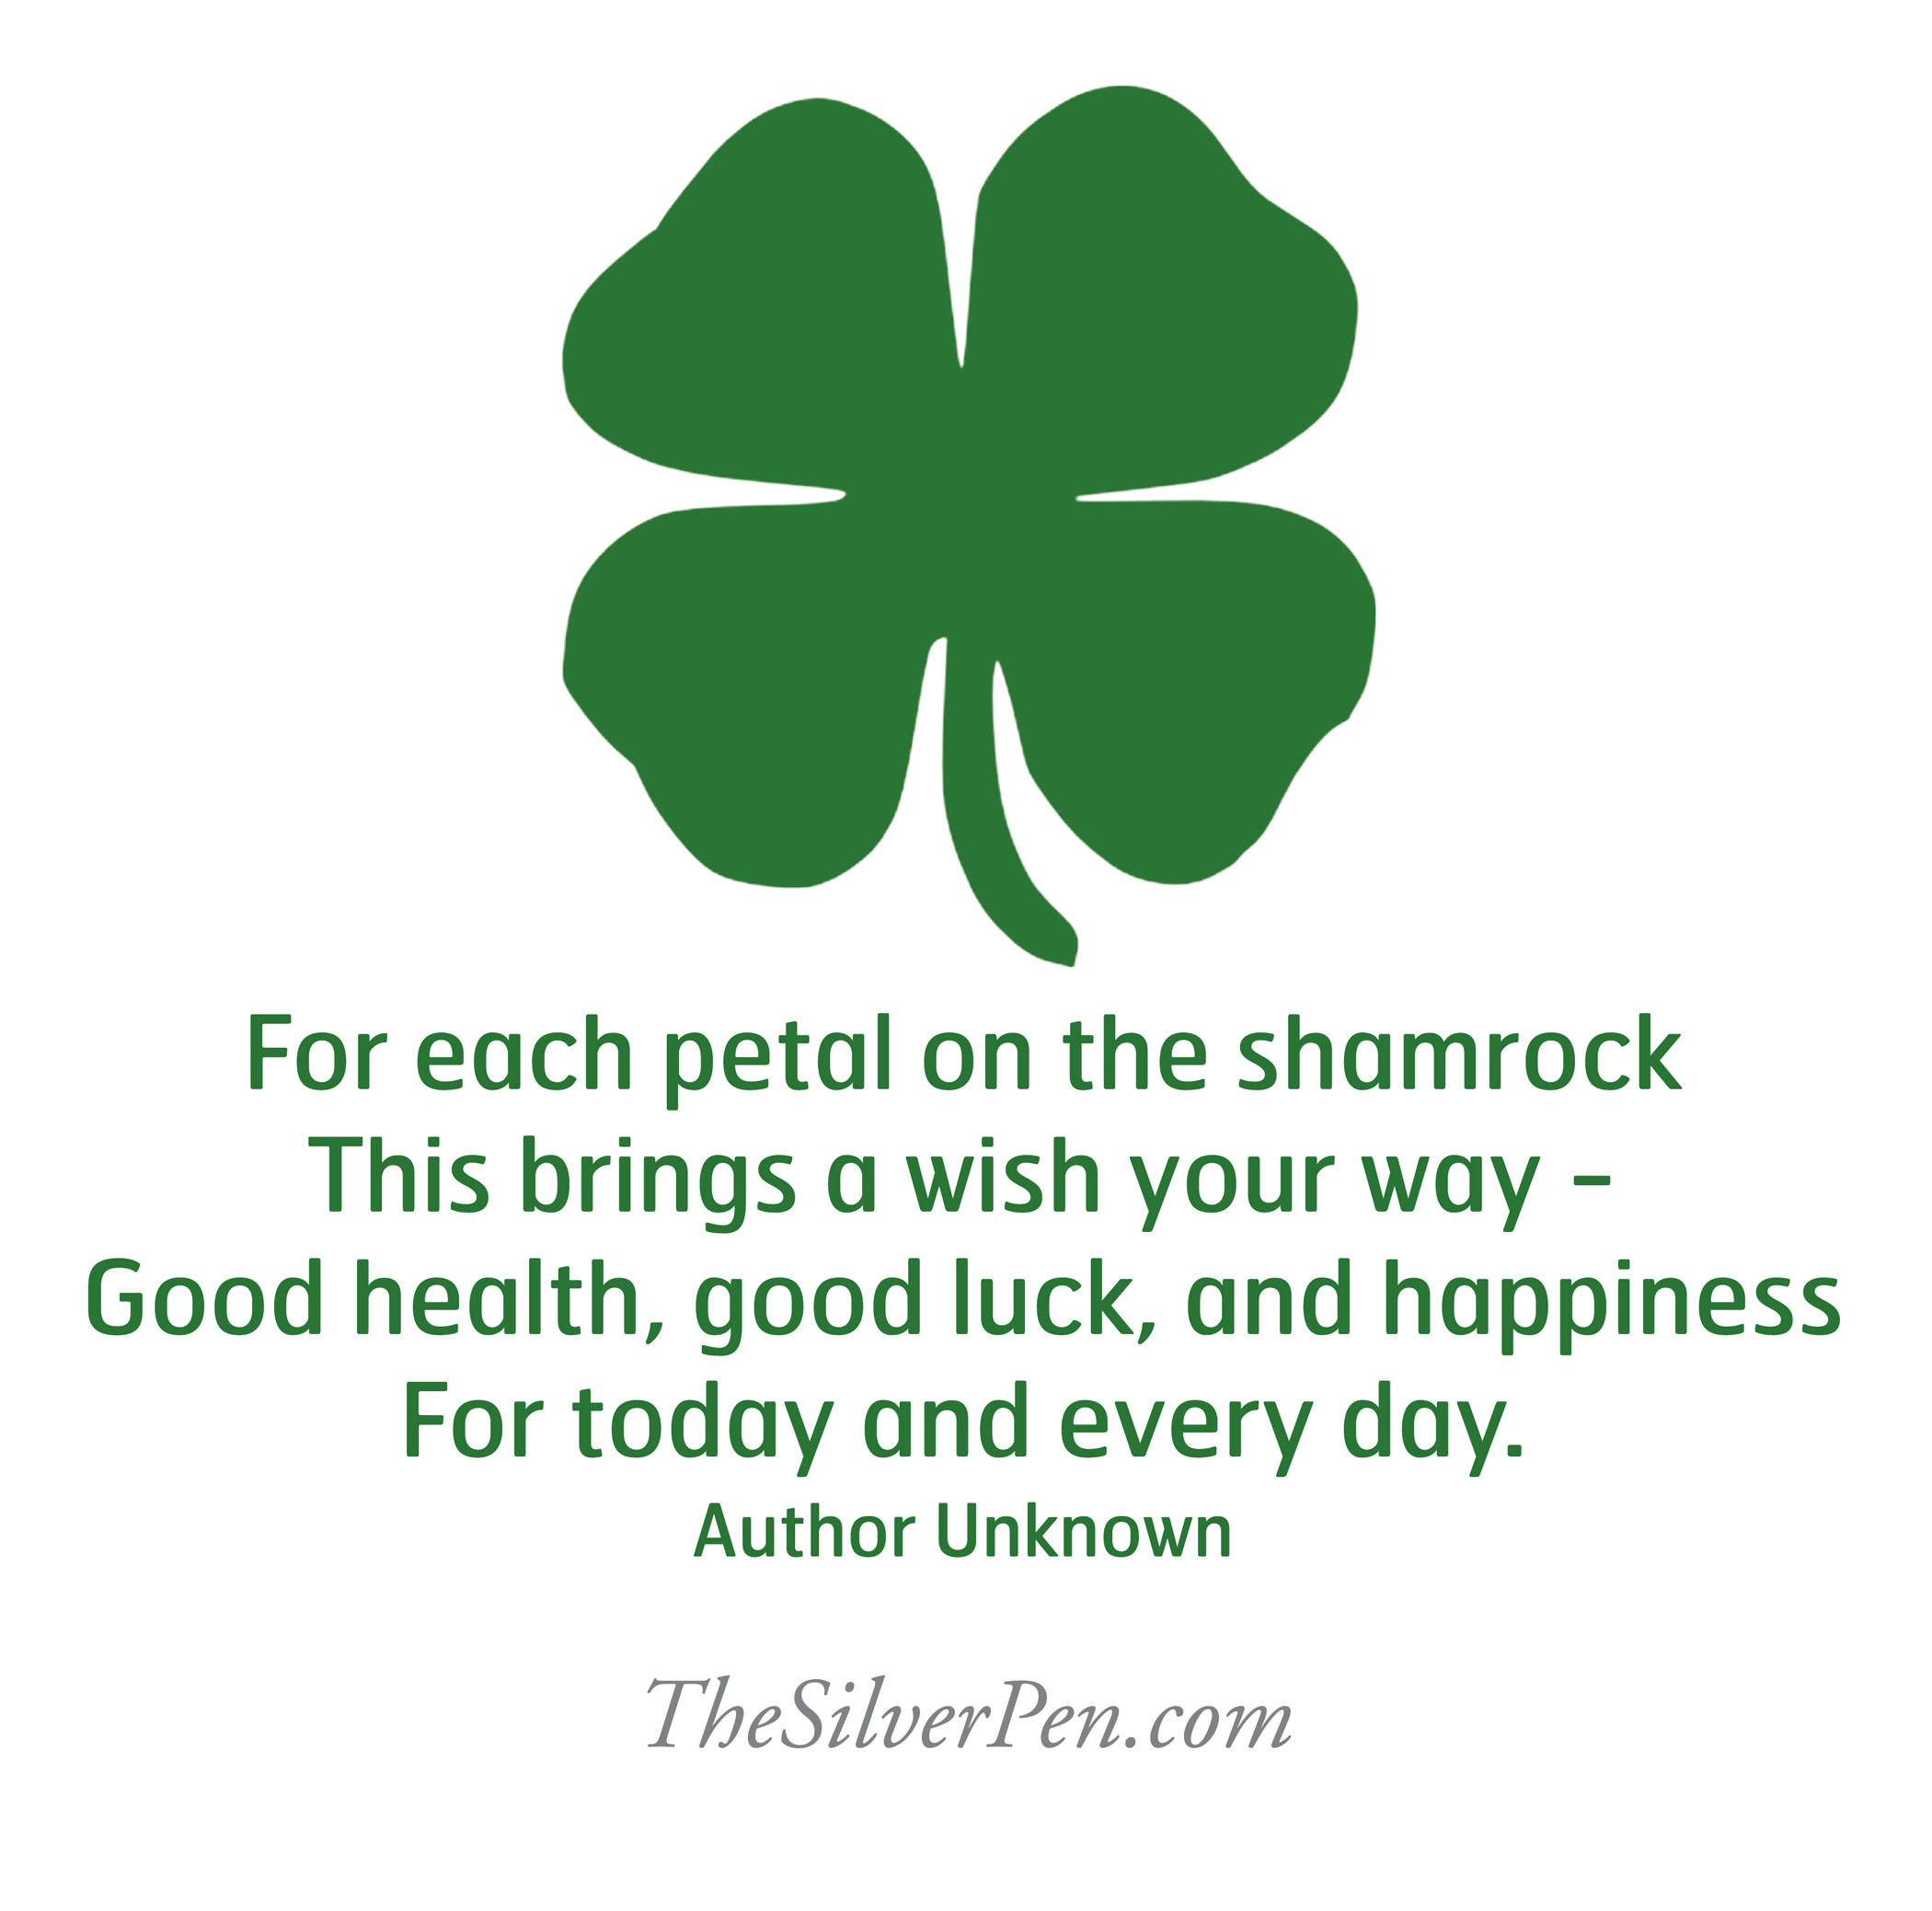 St Patrick Day Quotes
 St Patricks Day Inspirational Quotes QuotesGram